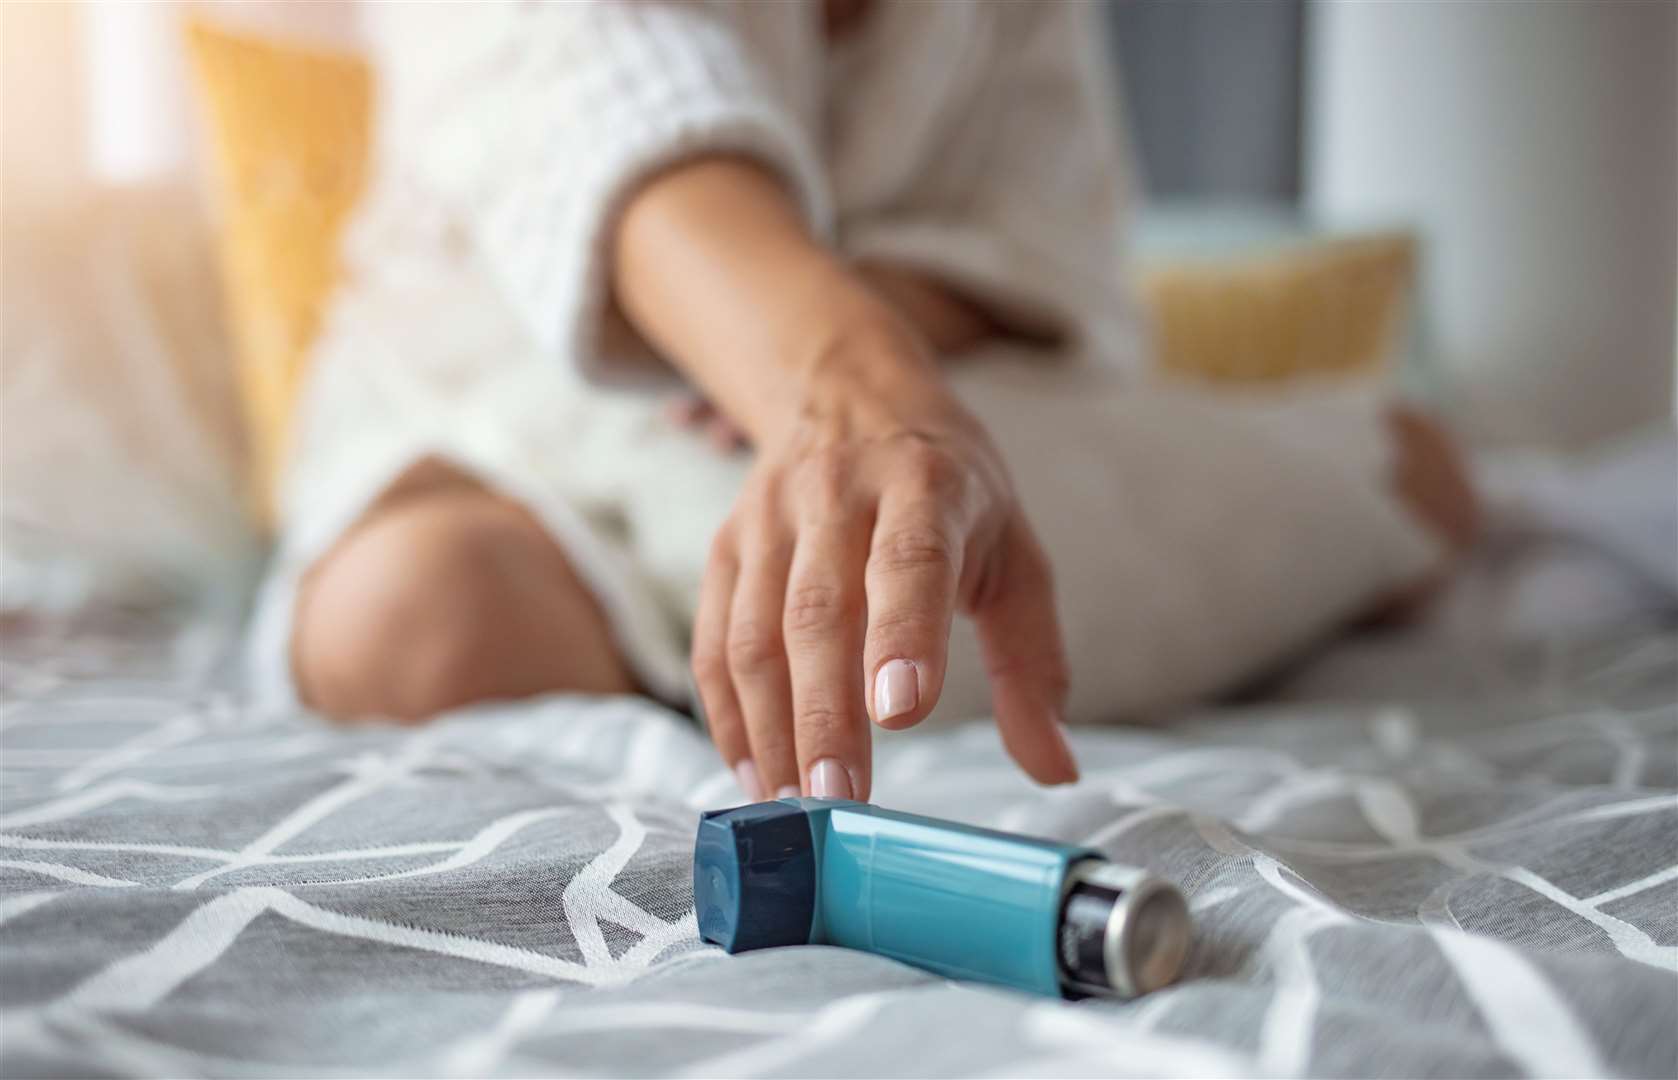 Asthma sufferers are being reminded to take medication they’re prescribed even when well. Image: iStock.